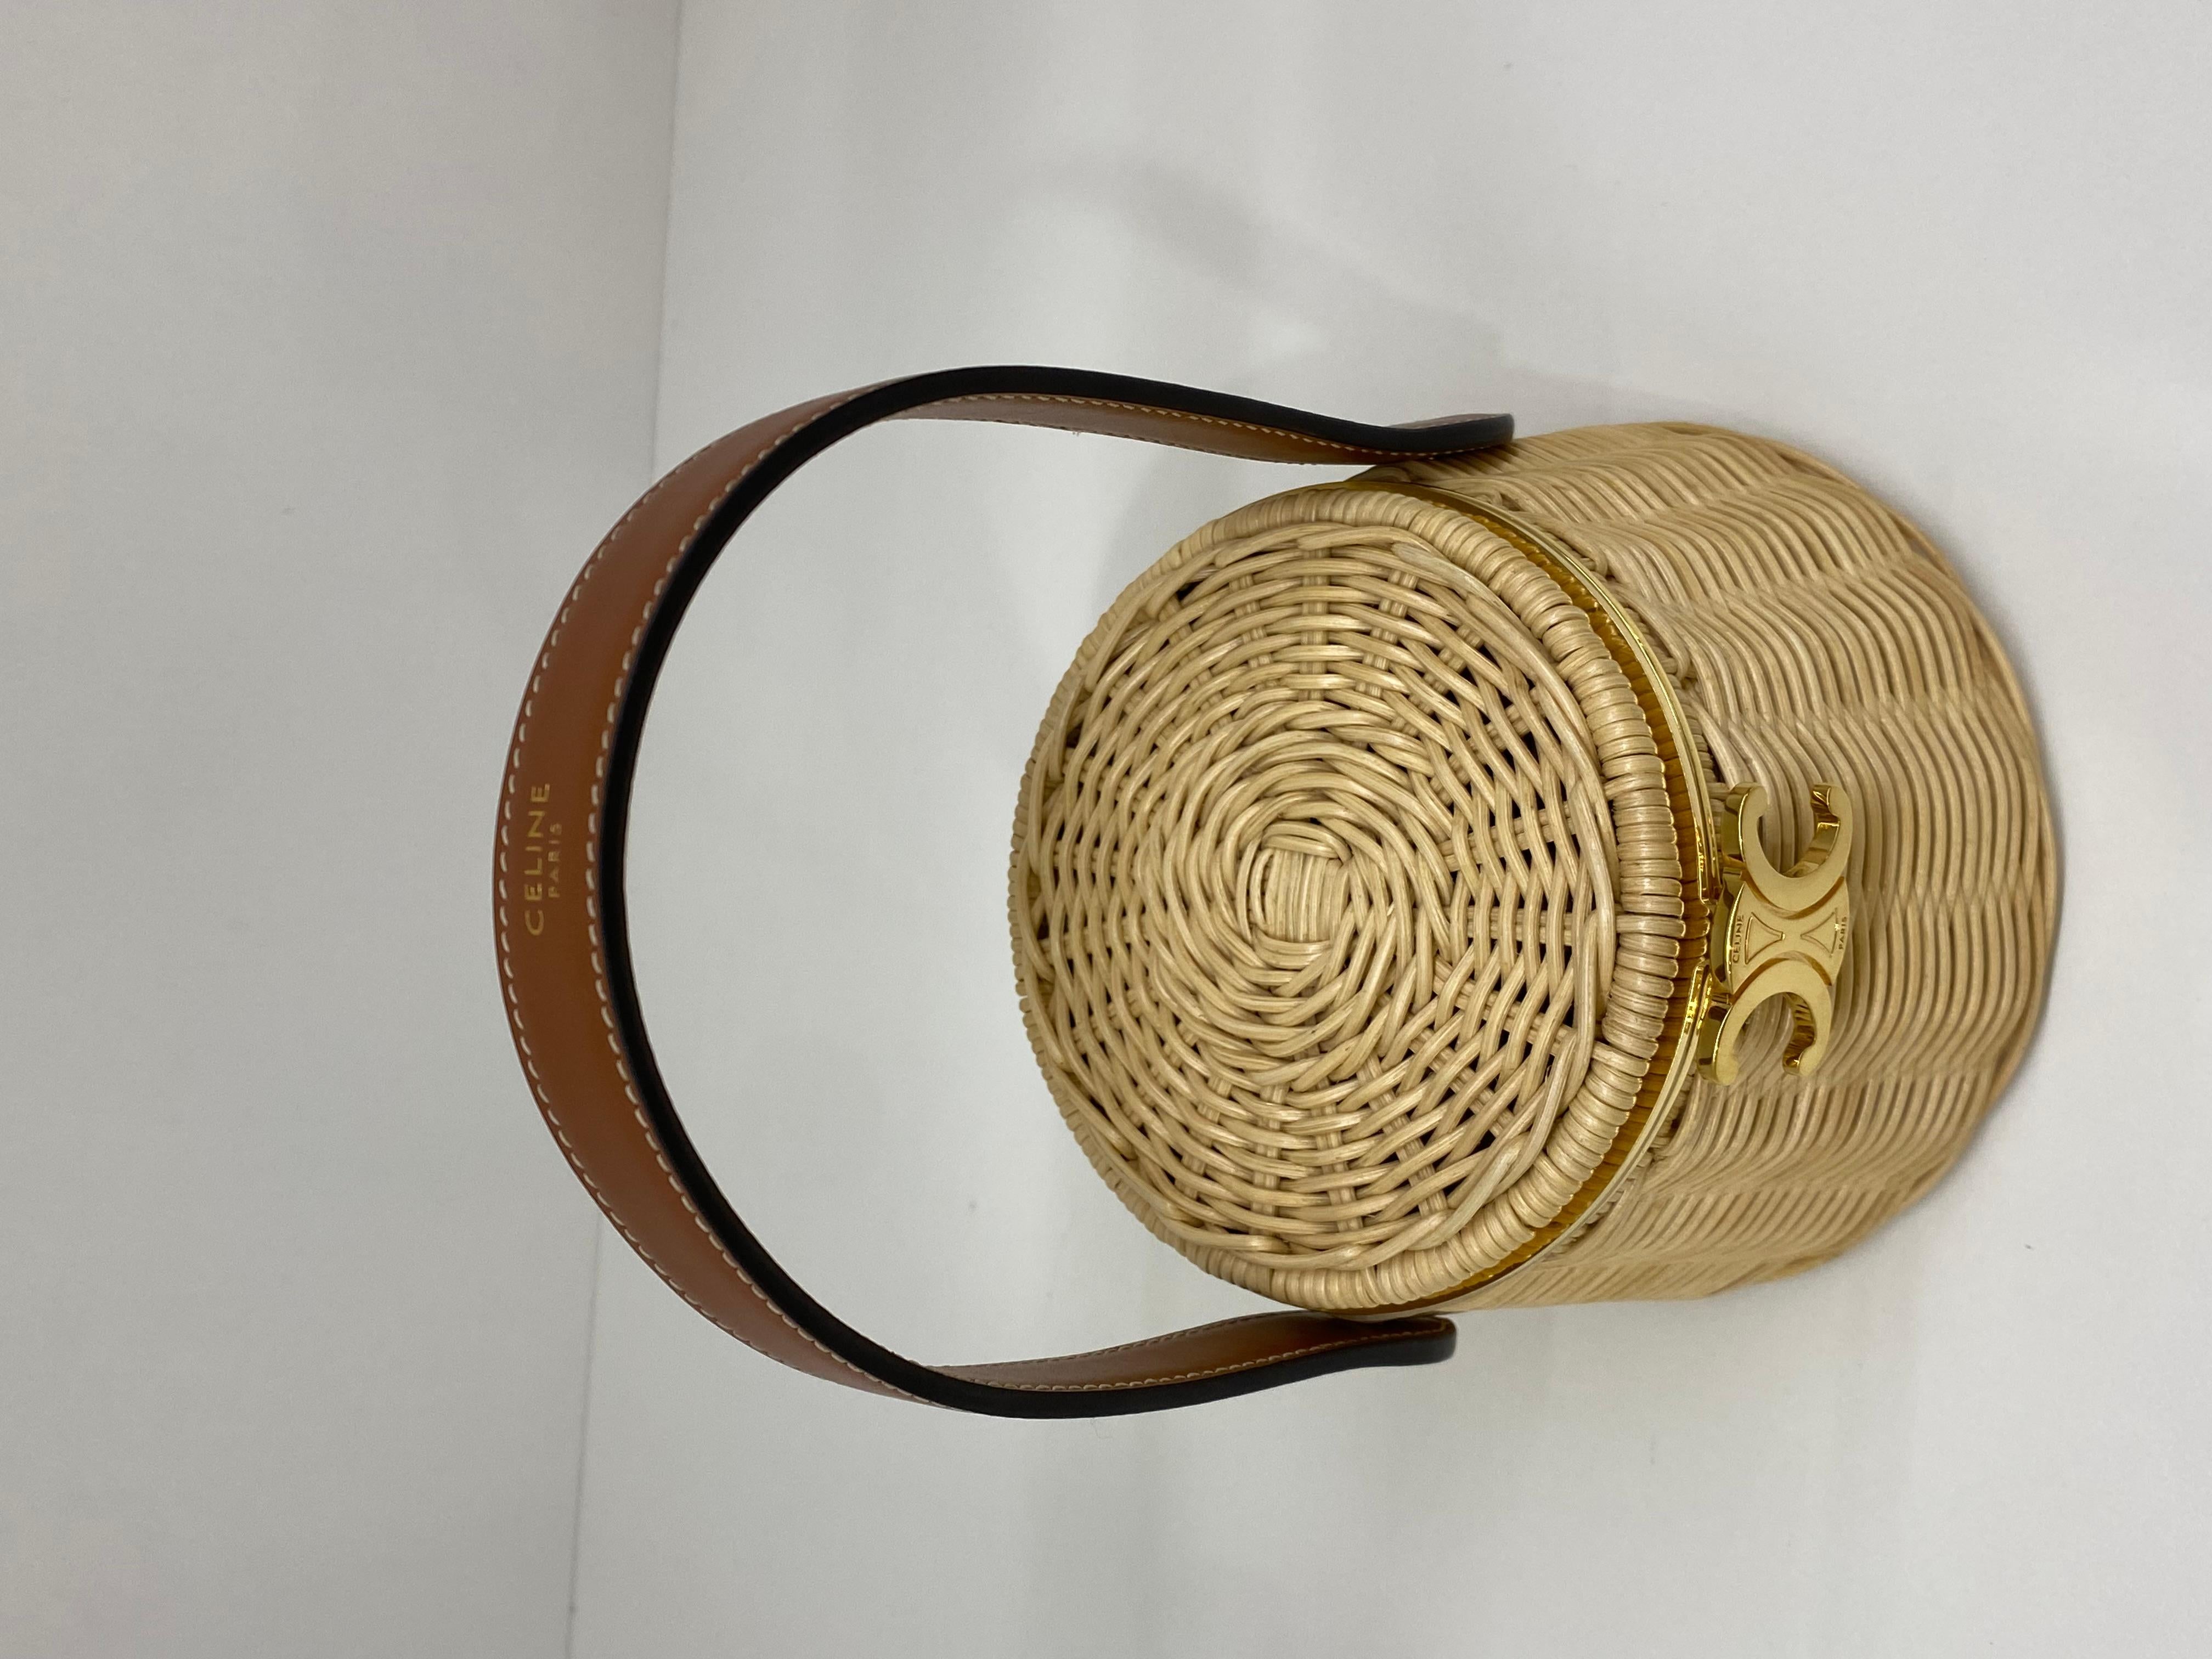 Celine Triomphe Wicker Bag In Excellent Condition For Sale In Double Bay, AU